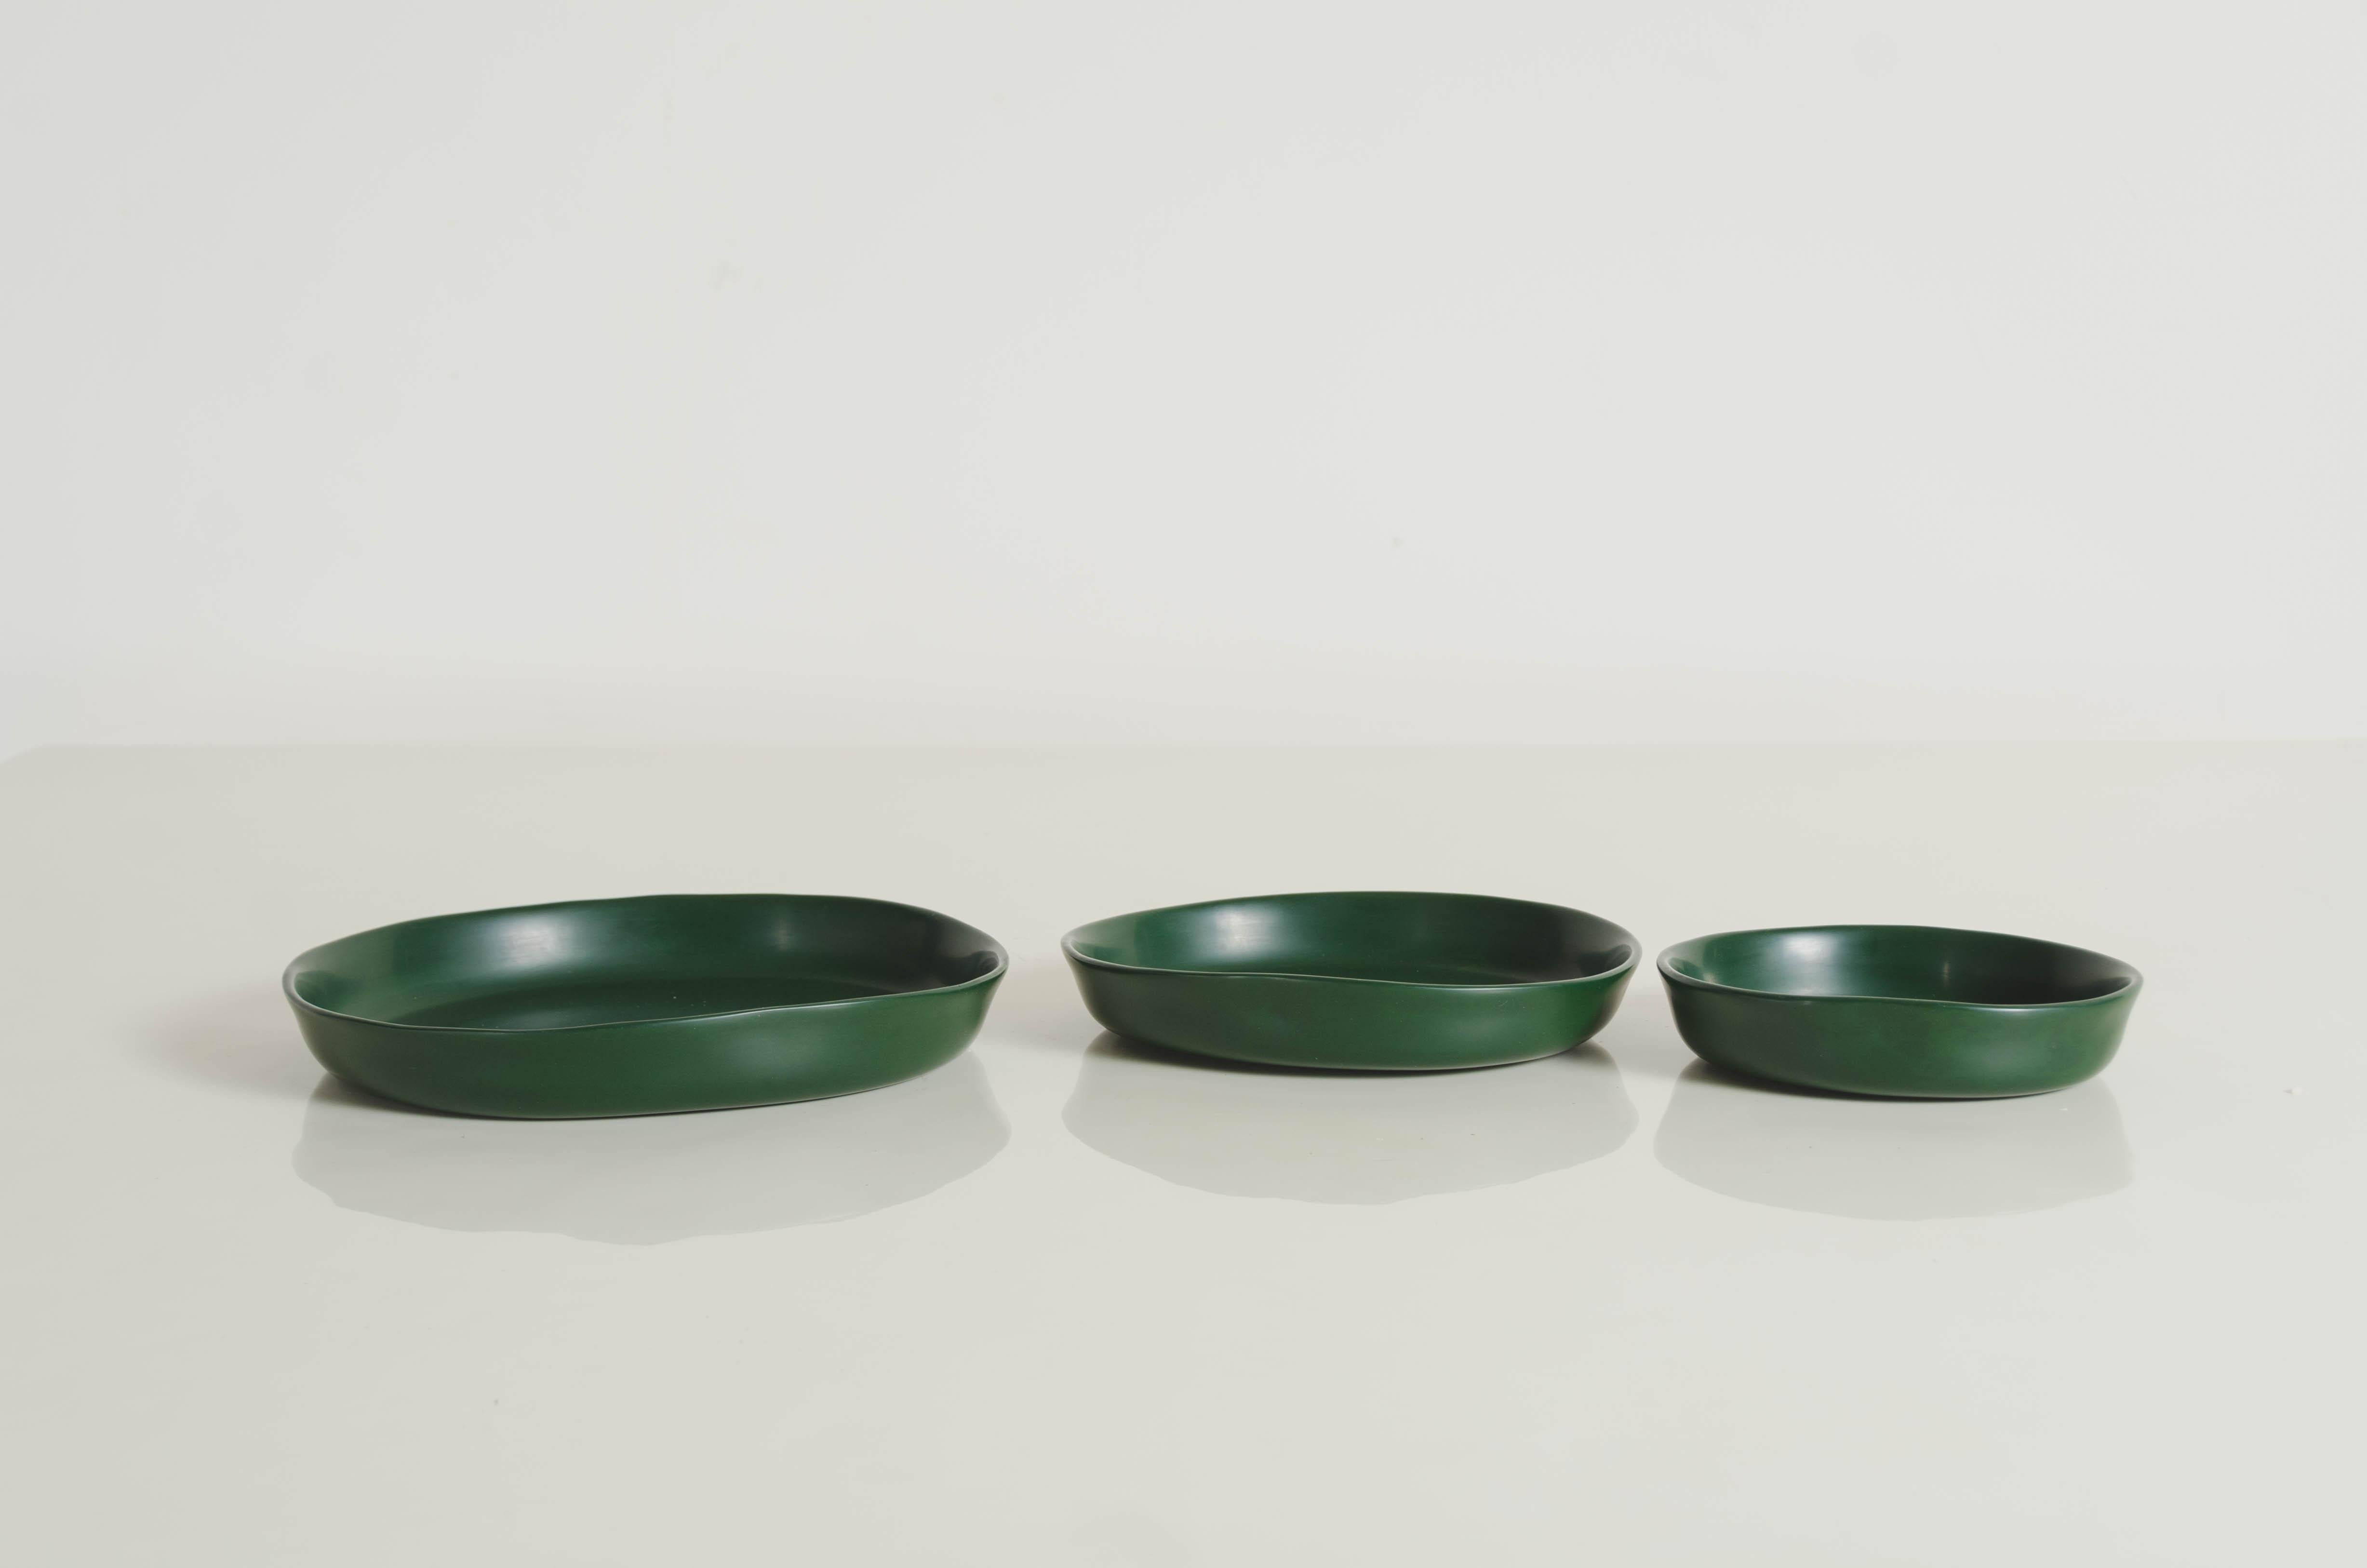 Round Plates, Set of 3, Green Lacquer by Robert Kuo, Handmade, Limited Edition For Sale 2